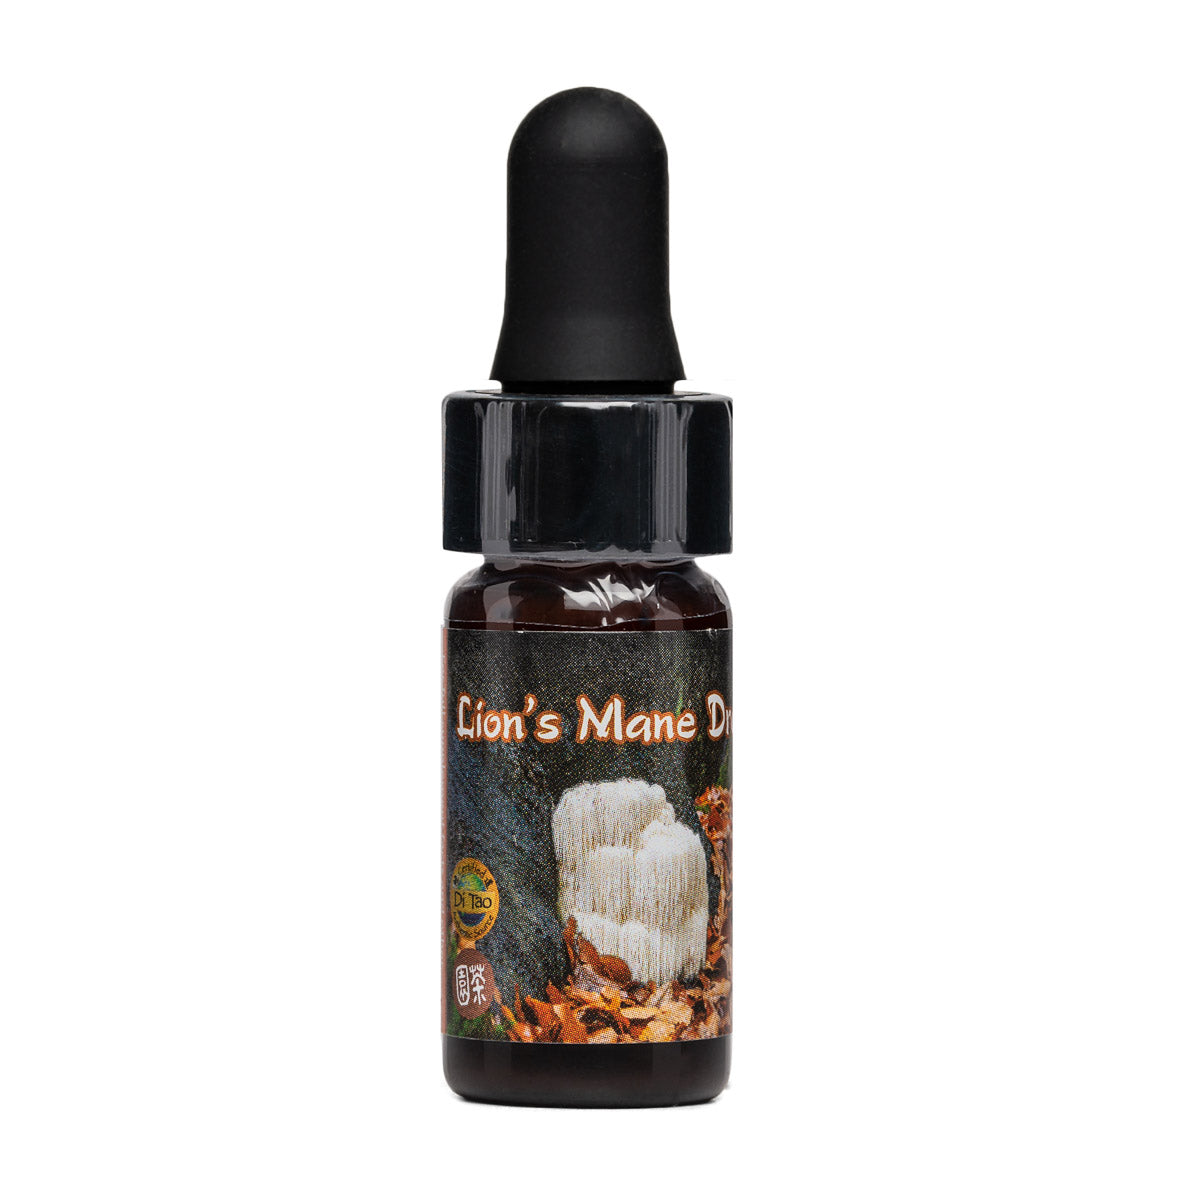 Lion&#39;s Mane Dragon Drops | Dragon Herbs | Raw Living UK | Tonic Herbs | Mushroom Extracts | Dragon Herbs Lion’s Mane Mushroom Drops: a nootropic extract containing Nerve Growth Factor. Also believed to support brain plasticity cognitive function.